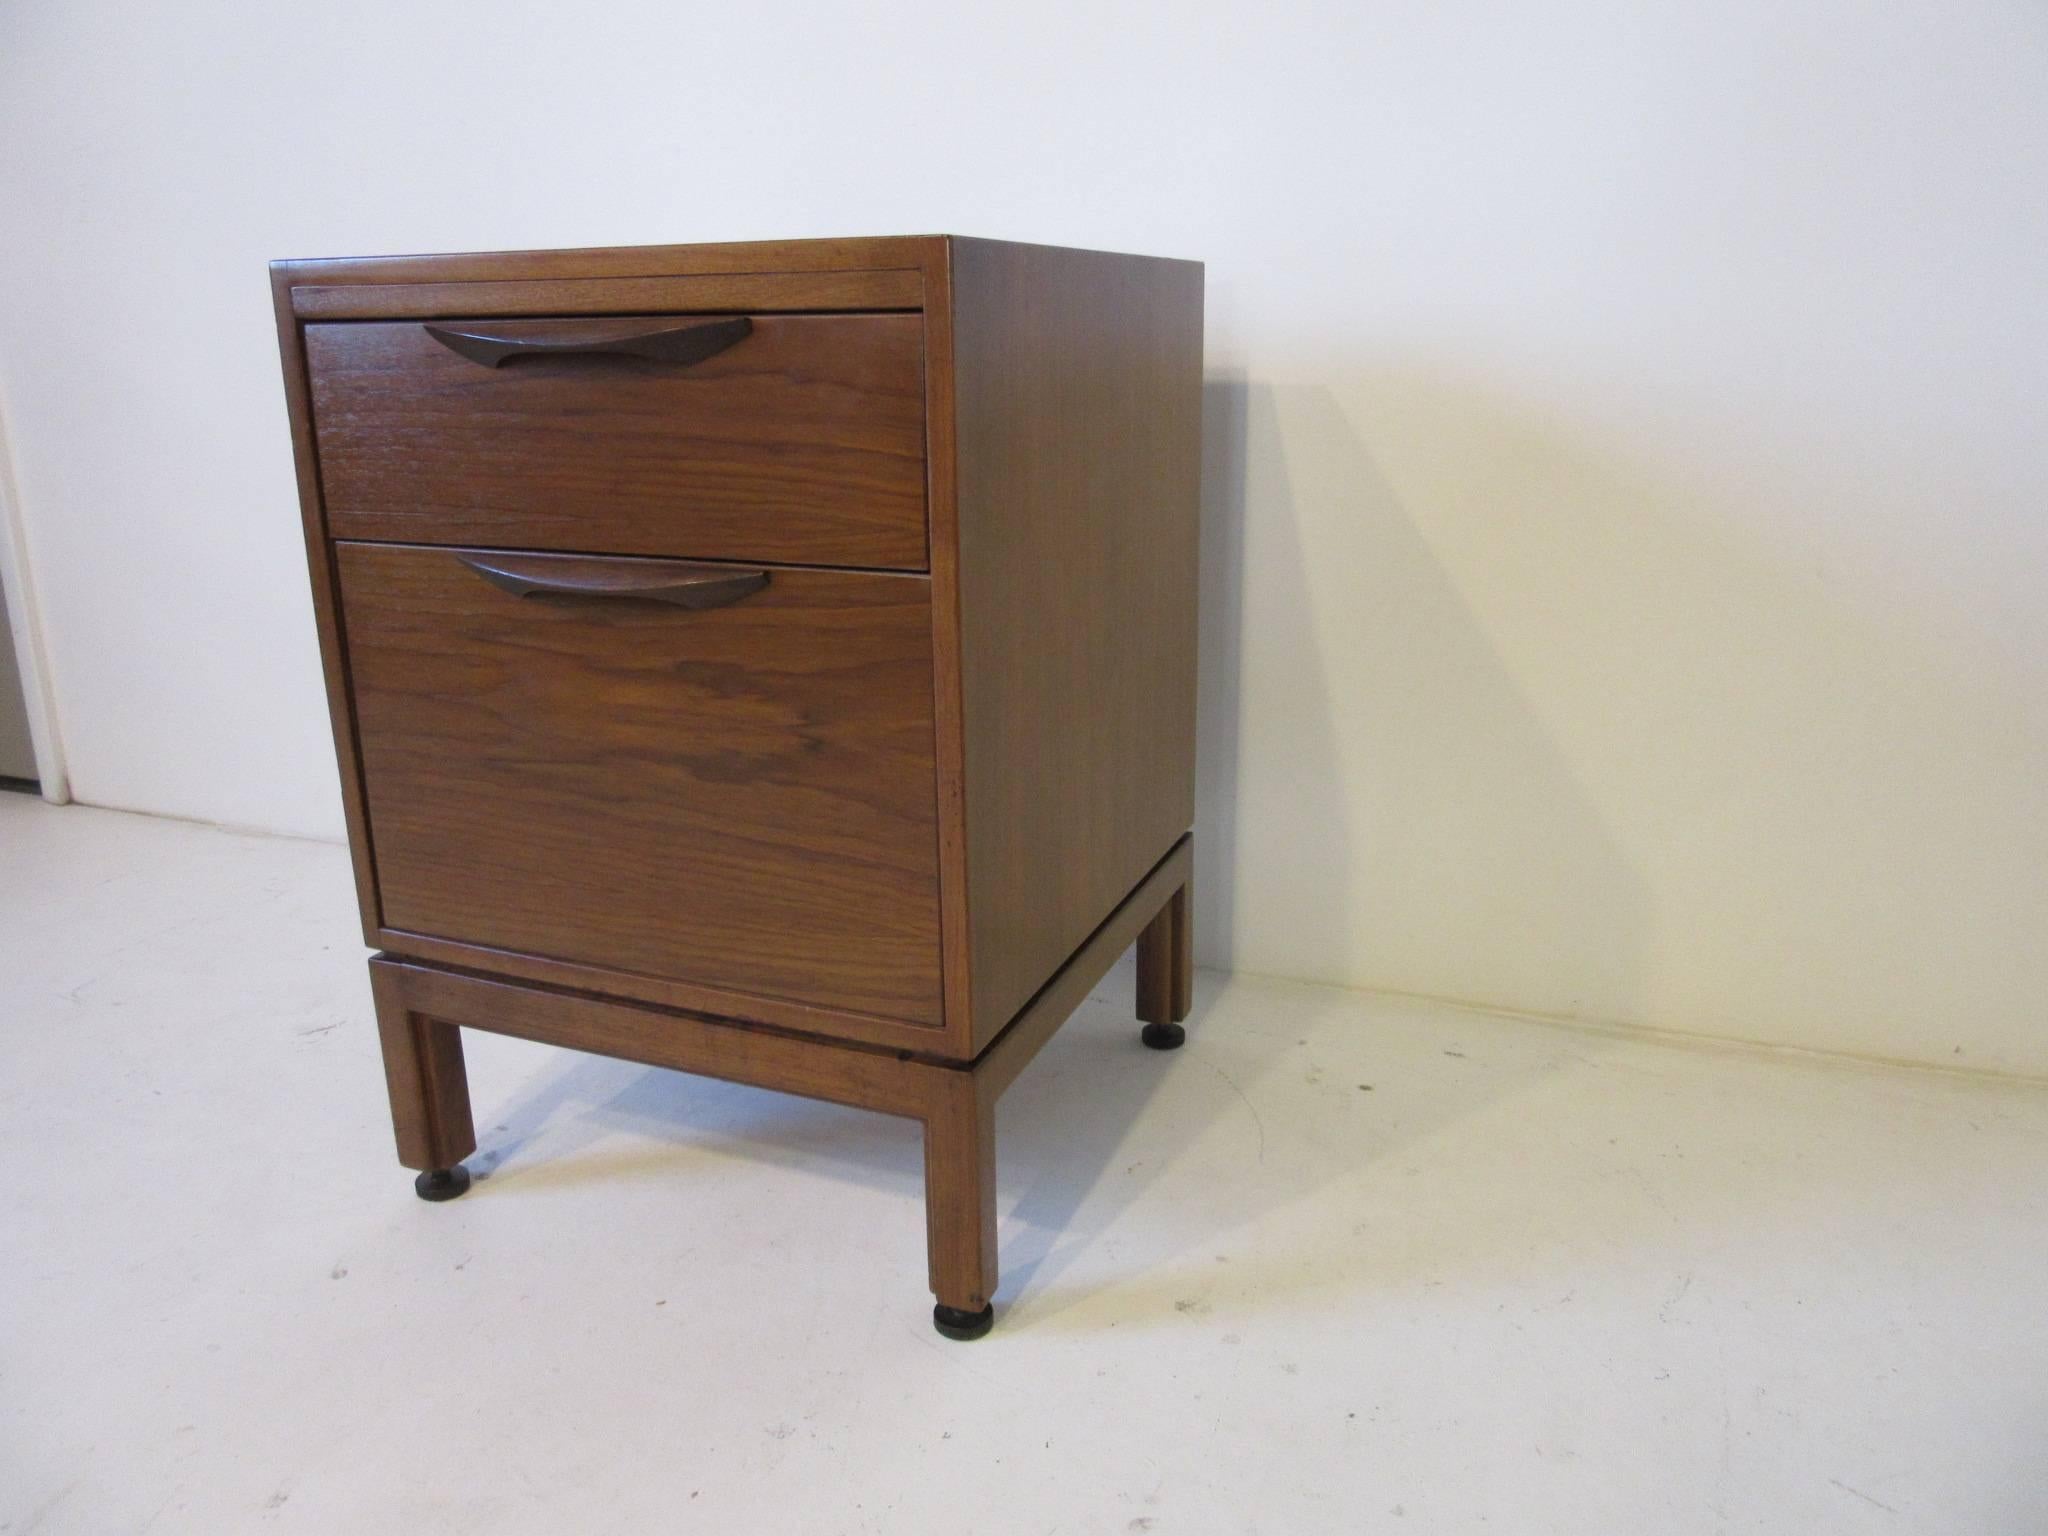 A stand alone medium dark walnut Jens Risom file cabinet with dark long walnut pulls and adjustable bronze toned foot pads. The cabinet has a smaller upper drawer and a lower full file drawer, could be used as a nightstand manufactured by Jens Risom